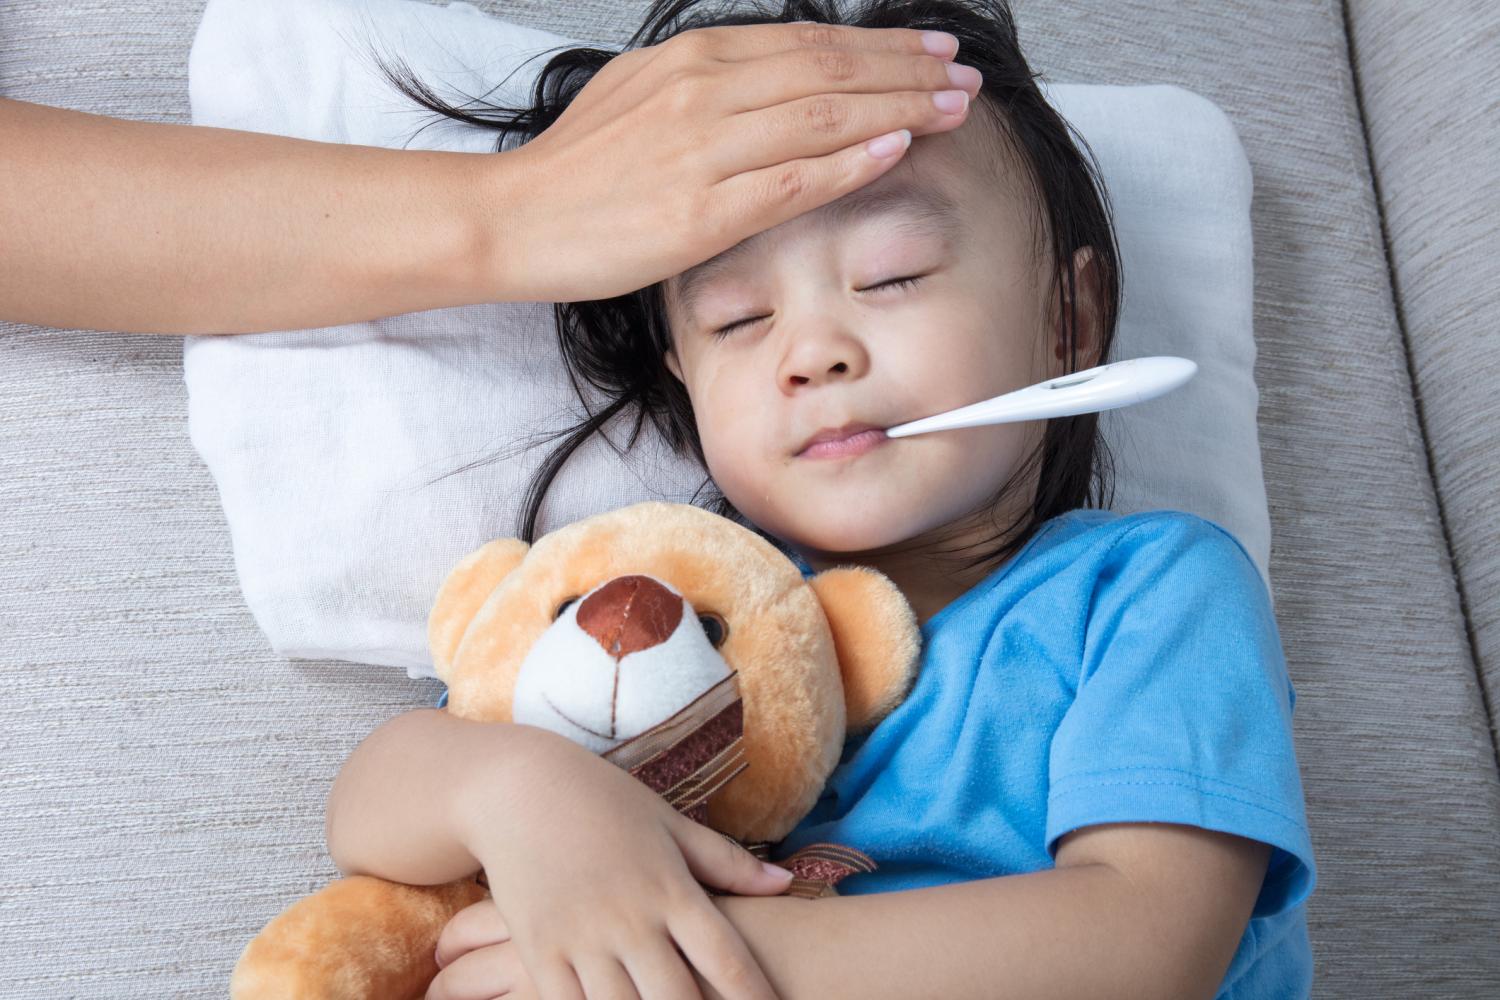 Young Asian girl with fever